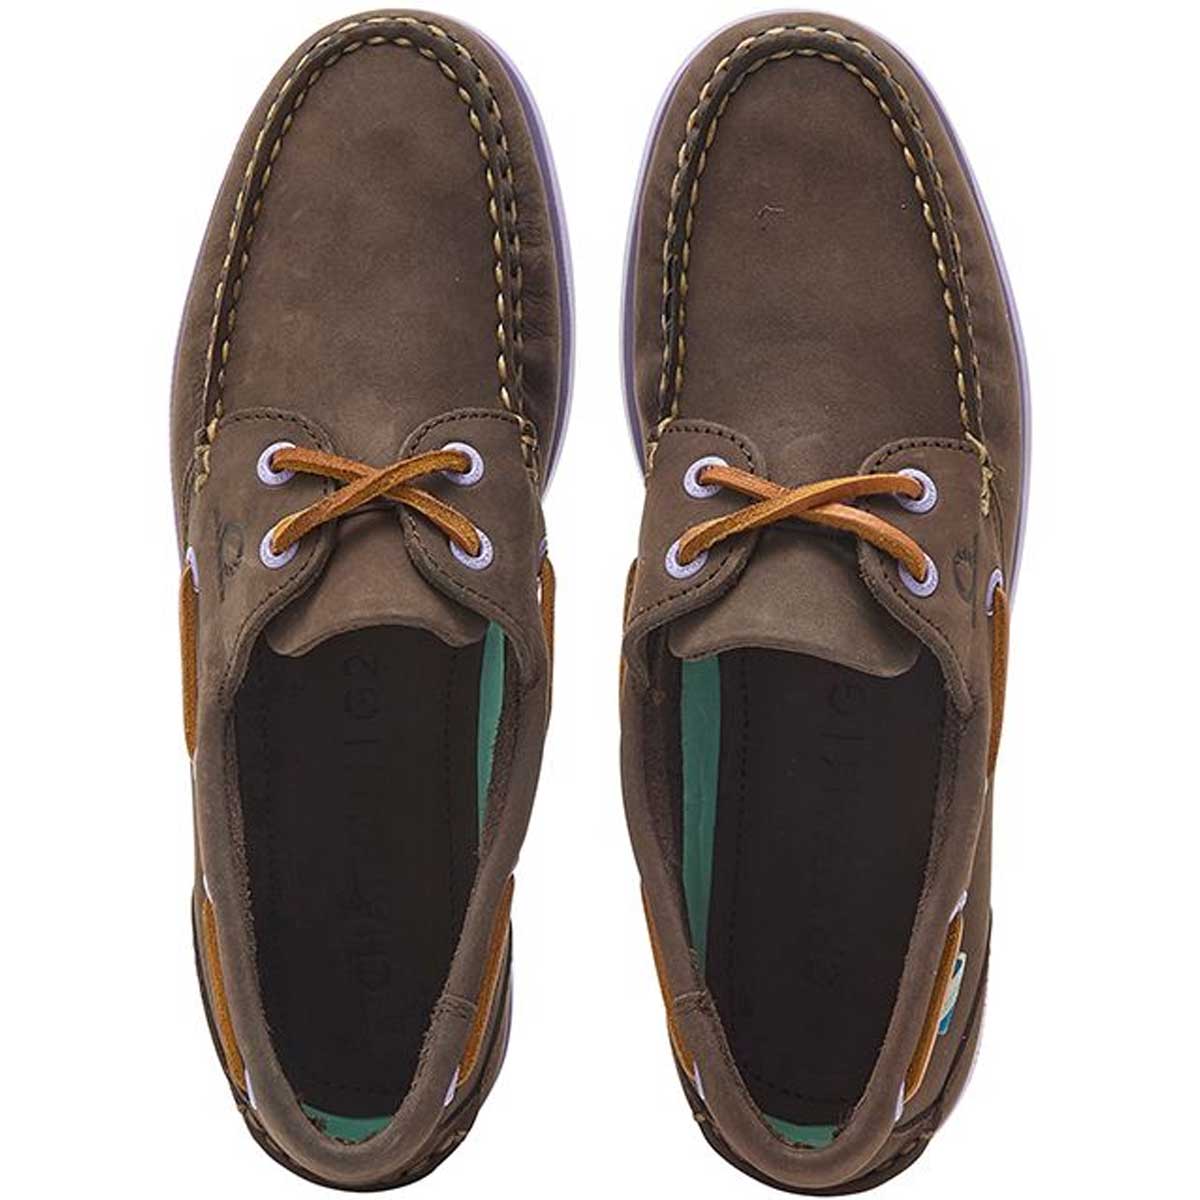 CHATHAM Pippa II G2 Leather Boat Shoes - Women's - Dark Brown / Lavender